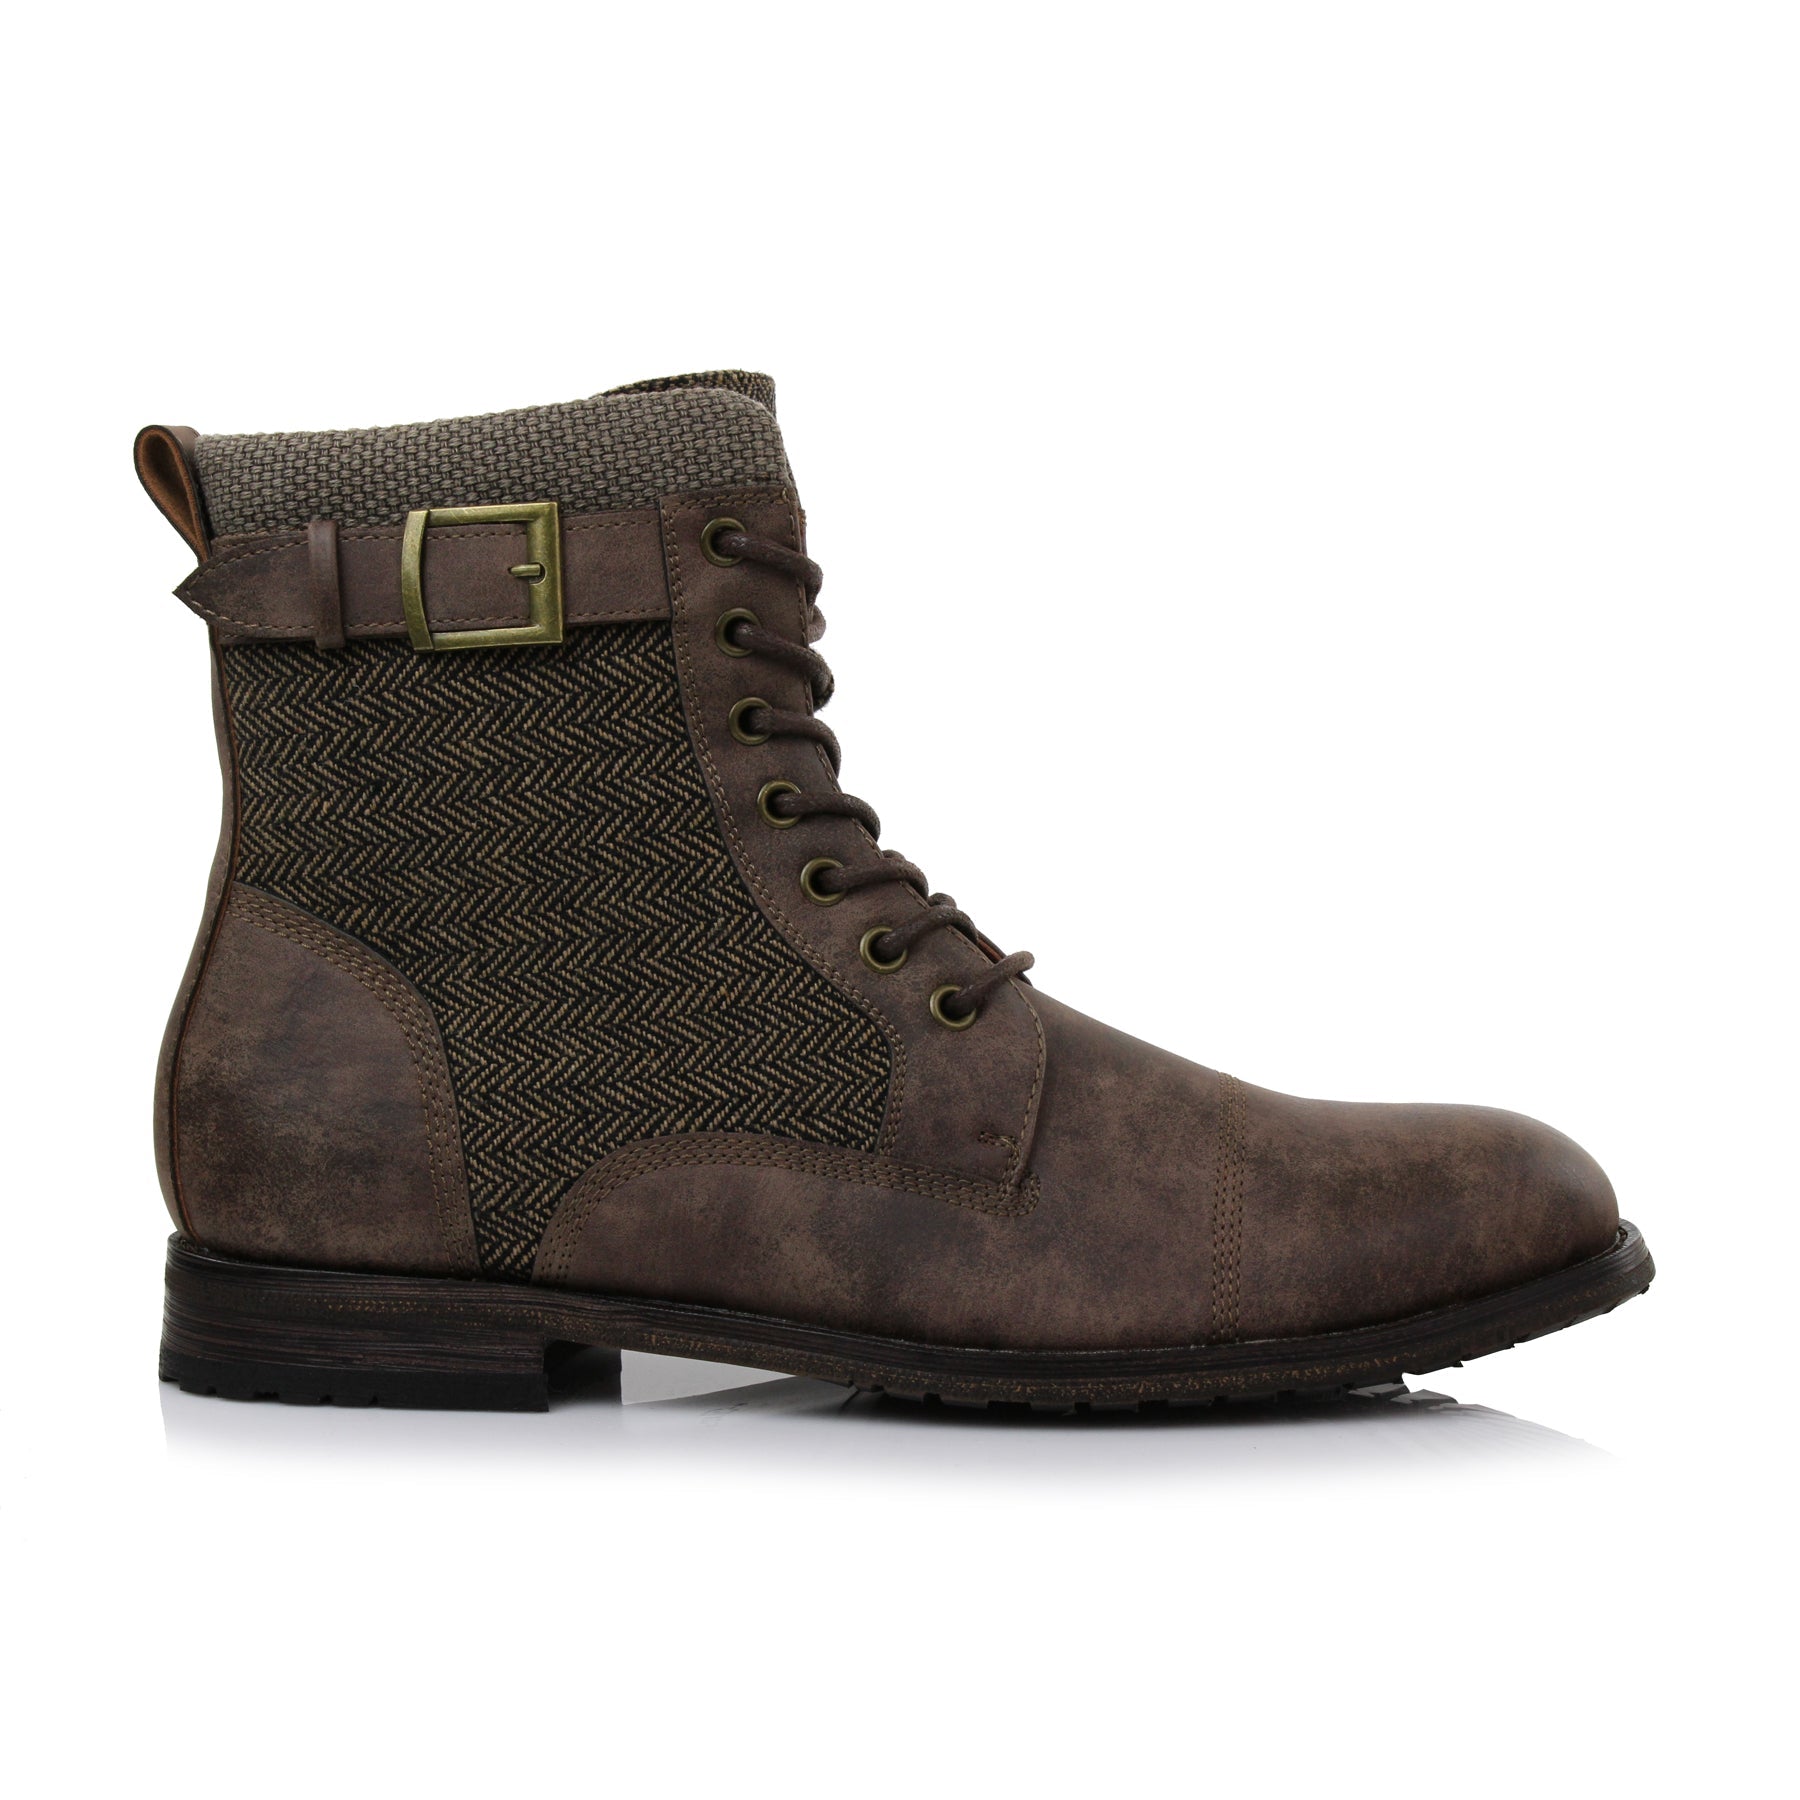 Rugged Duo-Textured Boots | Elijah by Polar Fox | Conal Footwear | Outer Side Angle View